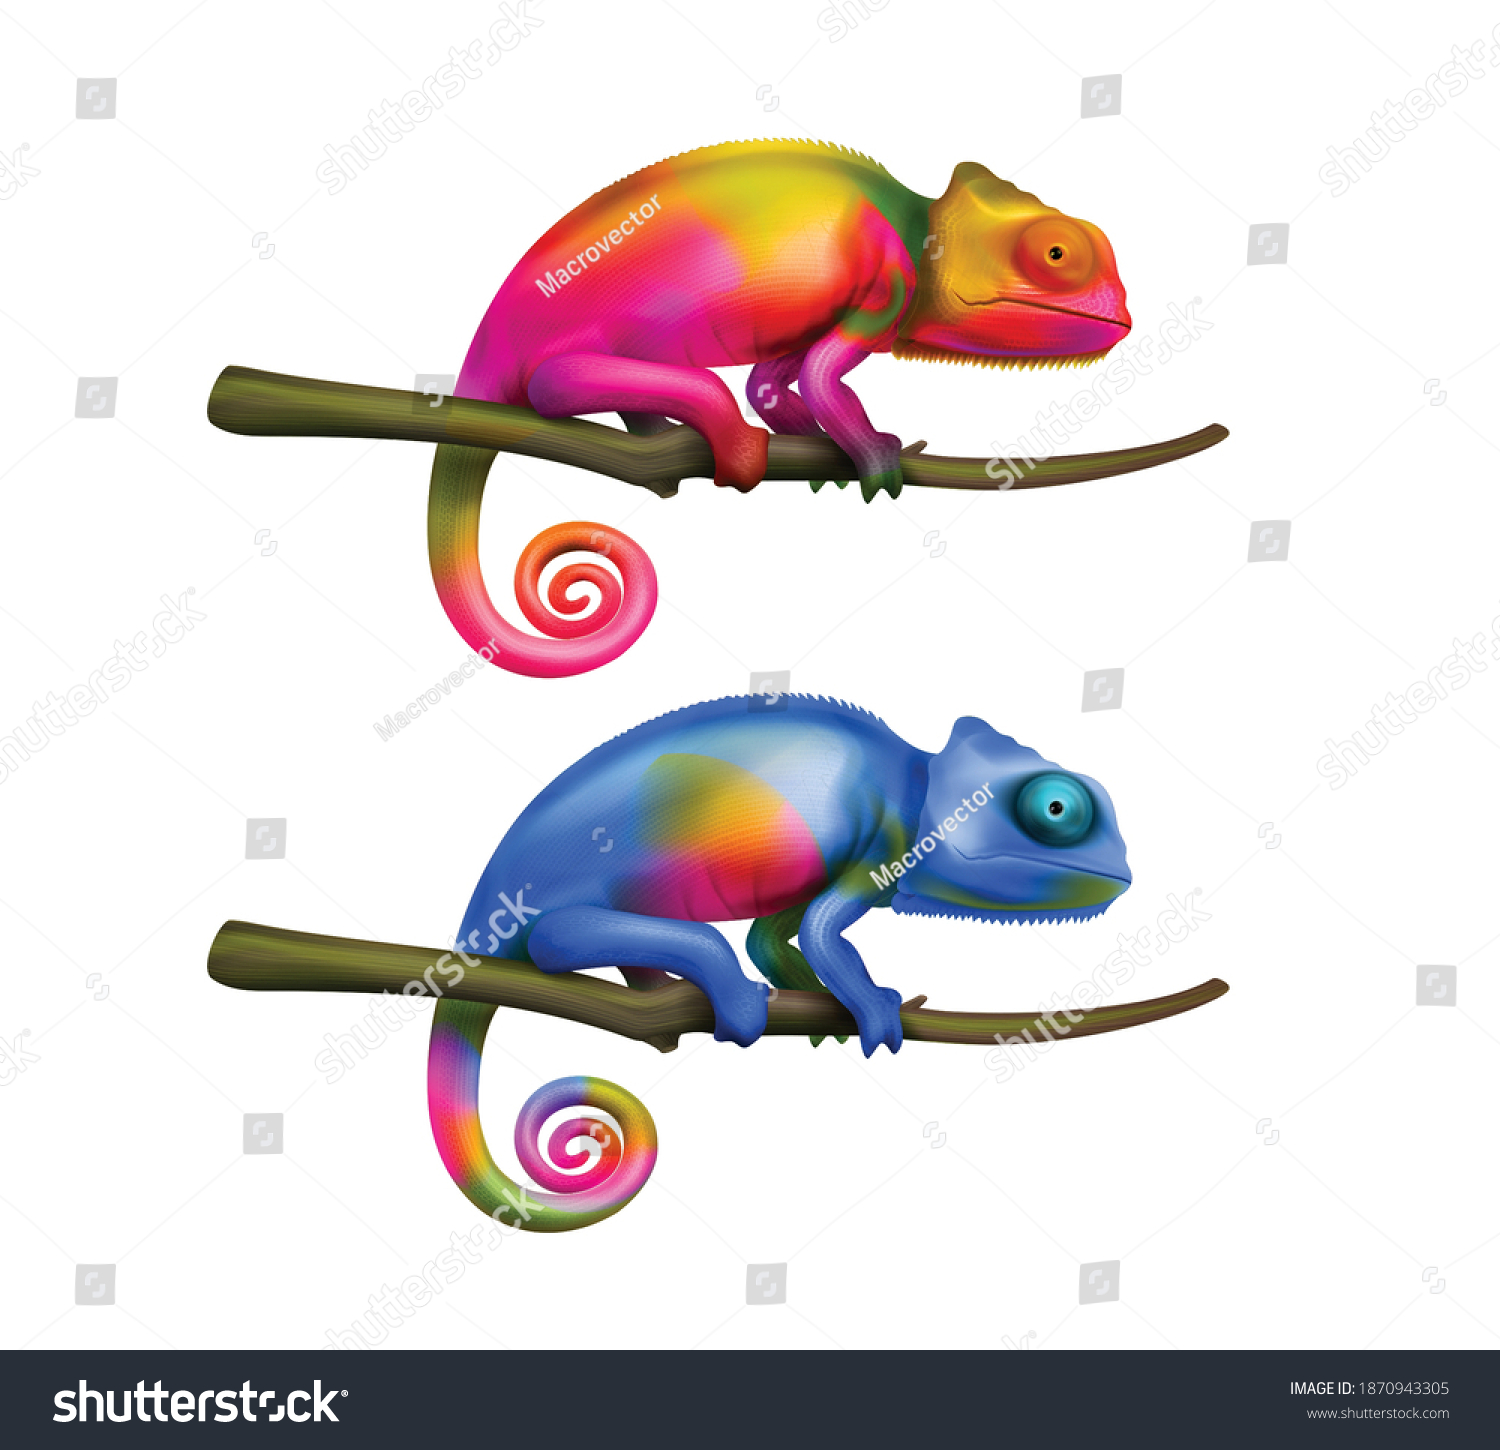 SVG of Two bright colorful chameleon lizards sitting on tree branches closeup isolated realistic images white background vector illustration      svg